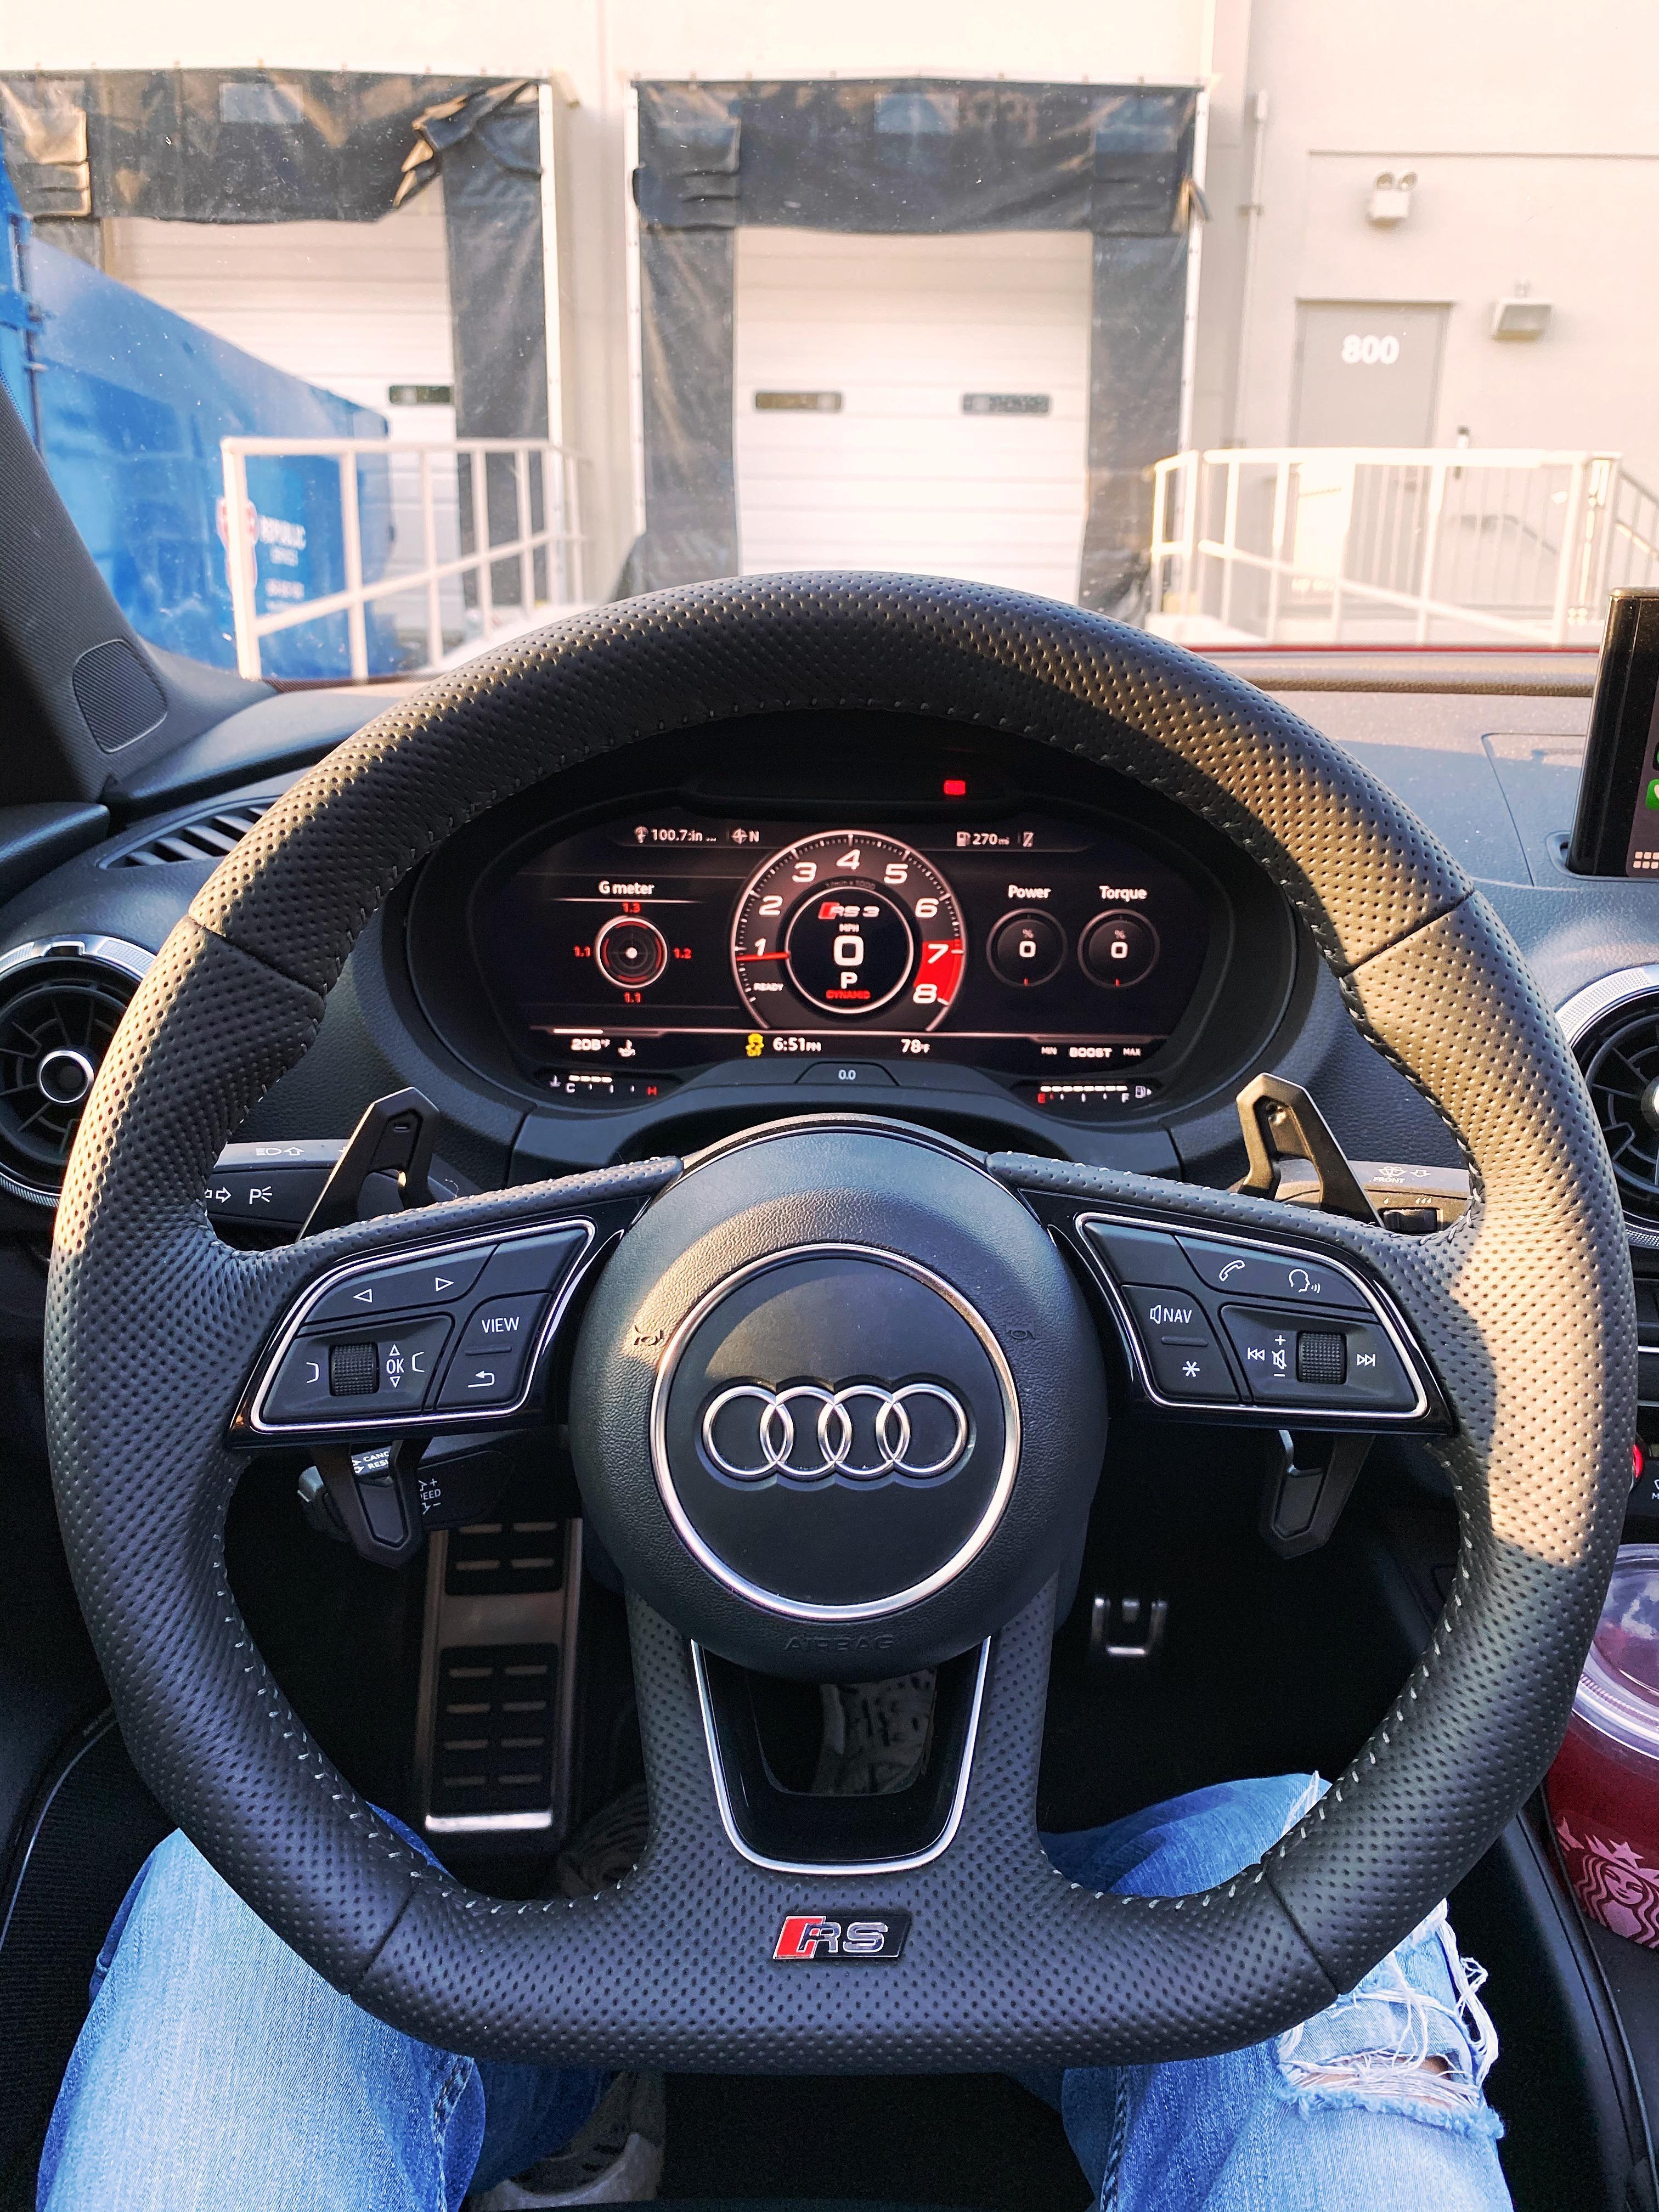 G Brand Replace Paddle Shifter for Audi A3 S3 RS3 A4 India